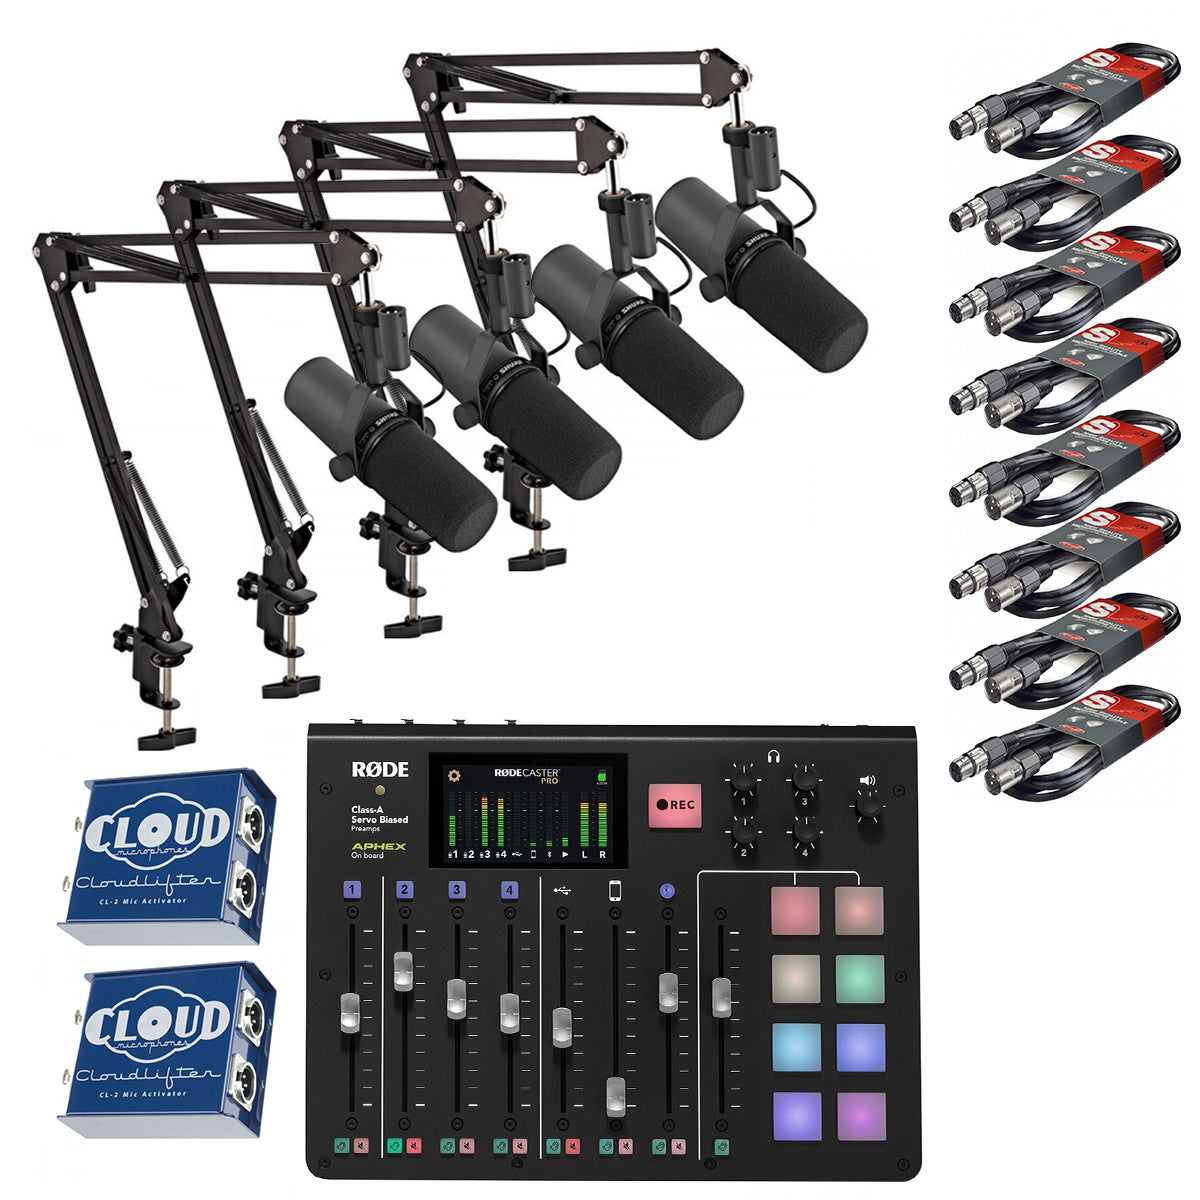 Rodecaster Pro Bundle with 4 x Shure SM7B